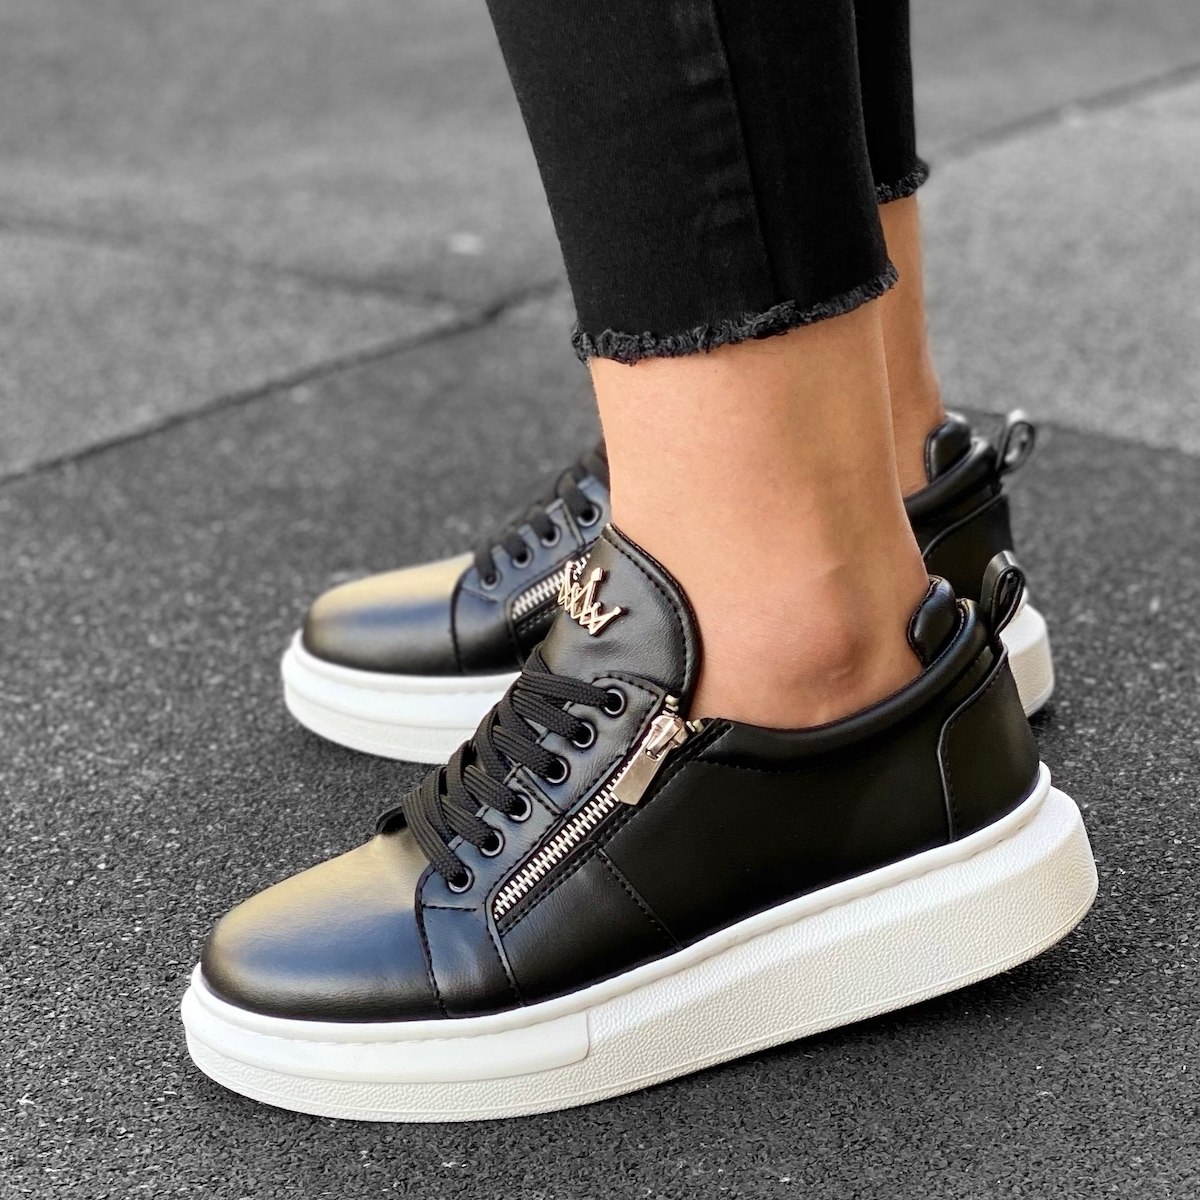 Women's Chunky Sneakers with Zippers in Black and White | Martin Valen